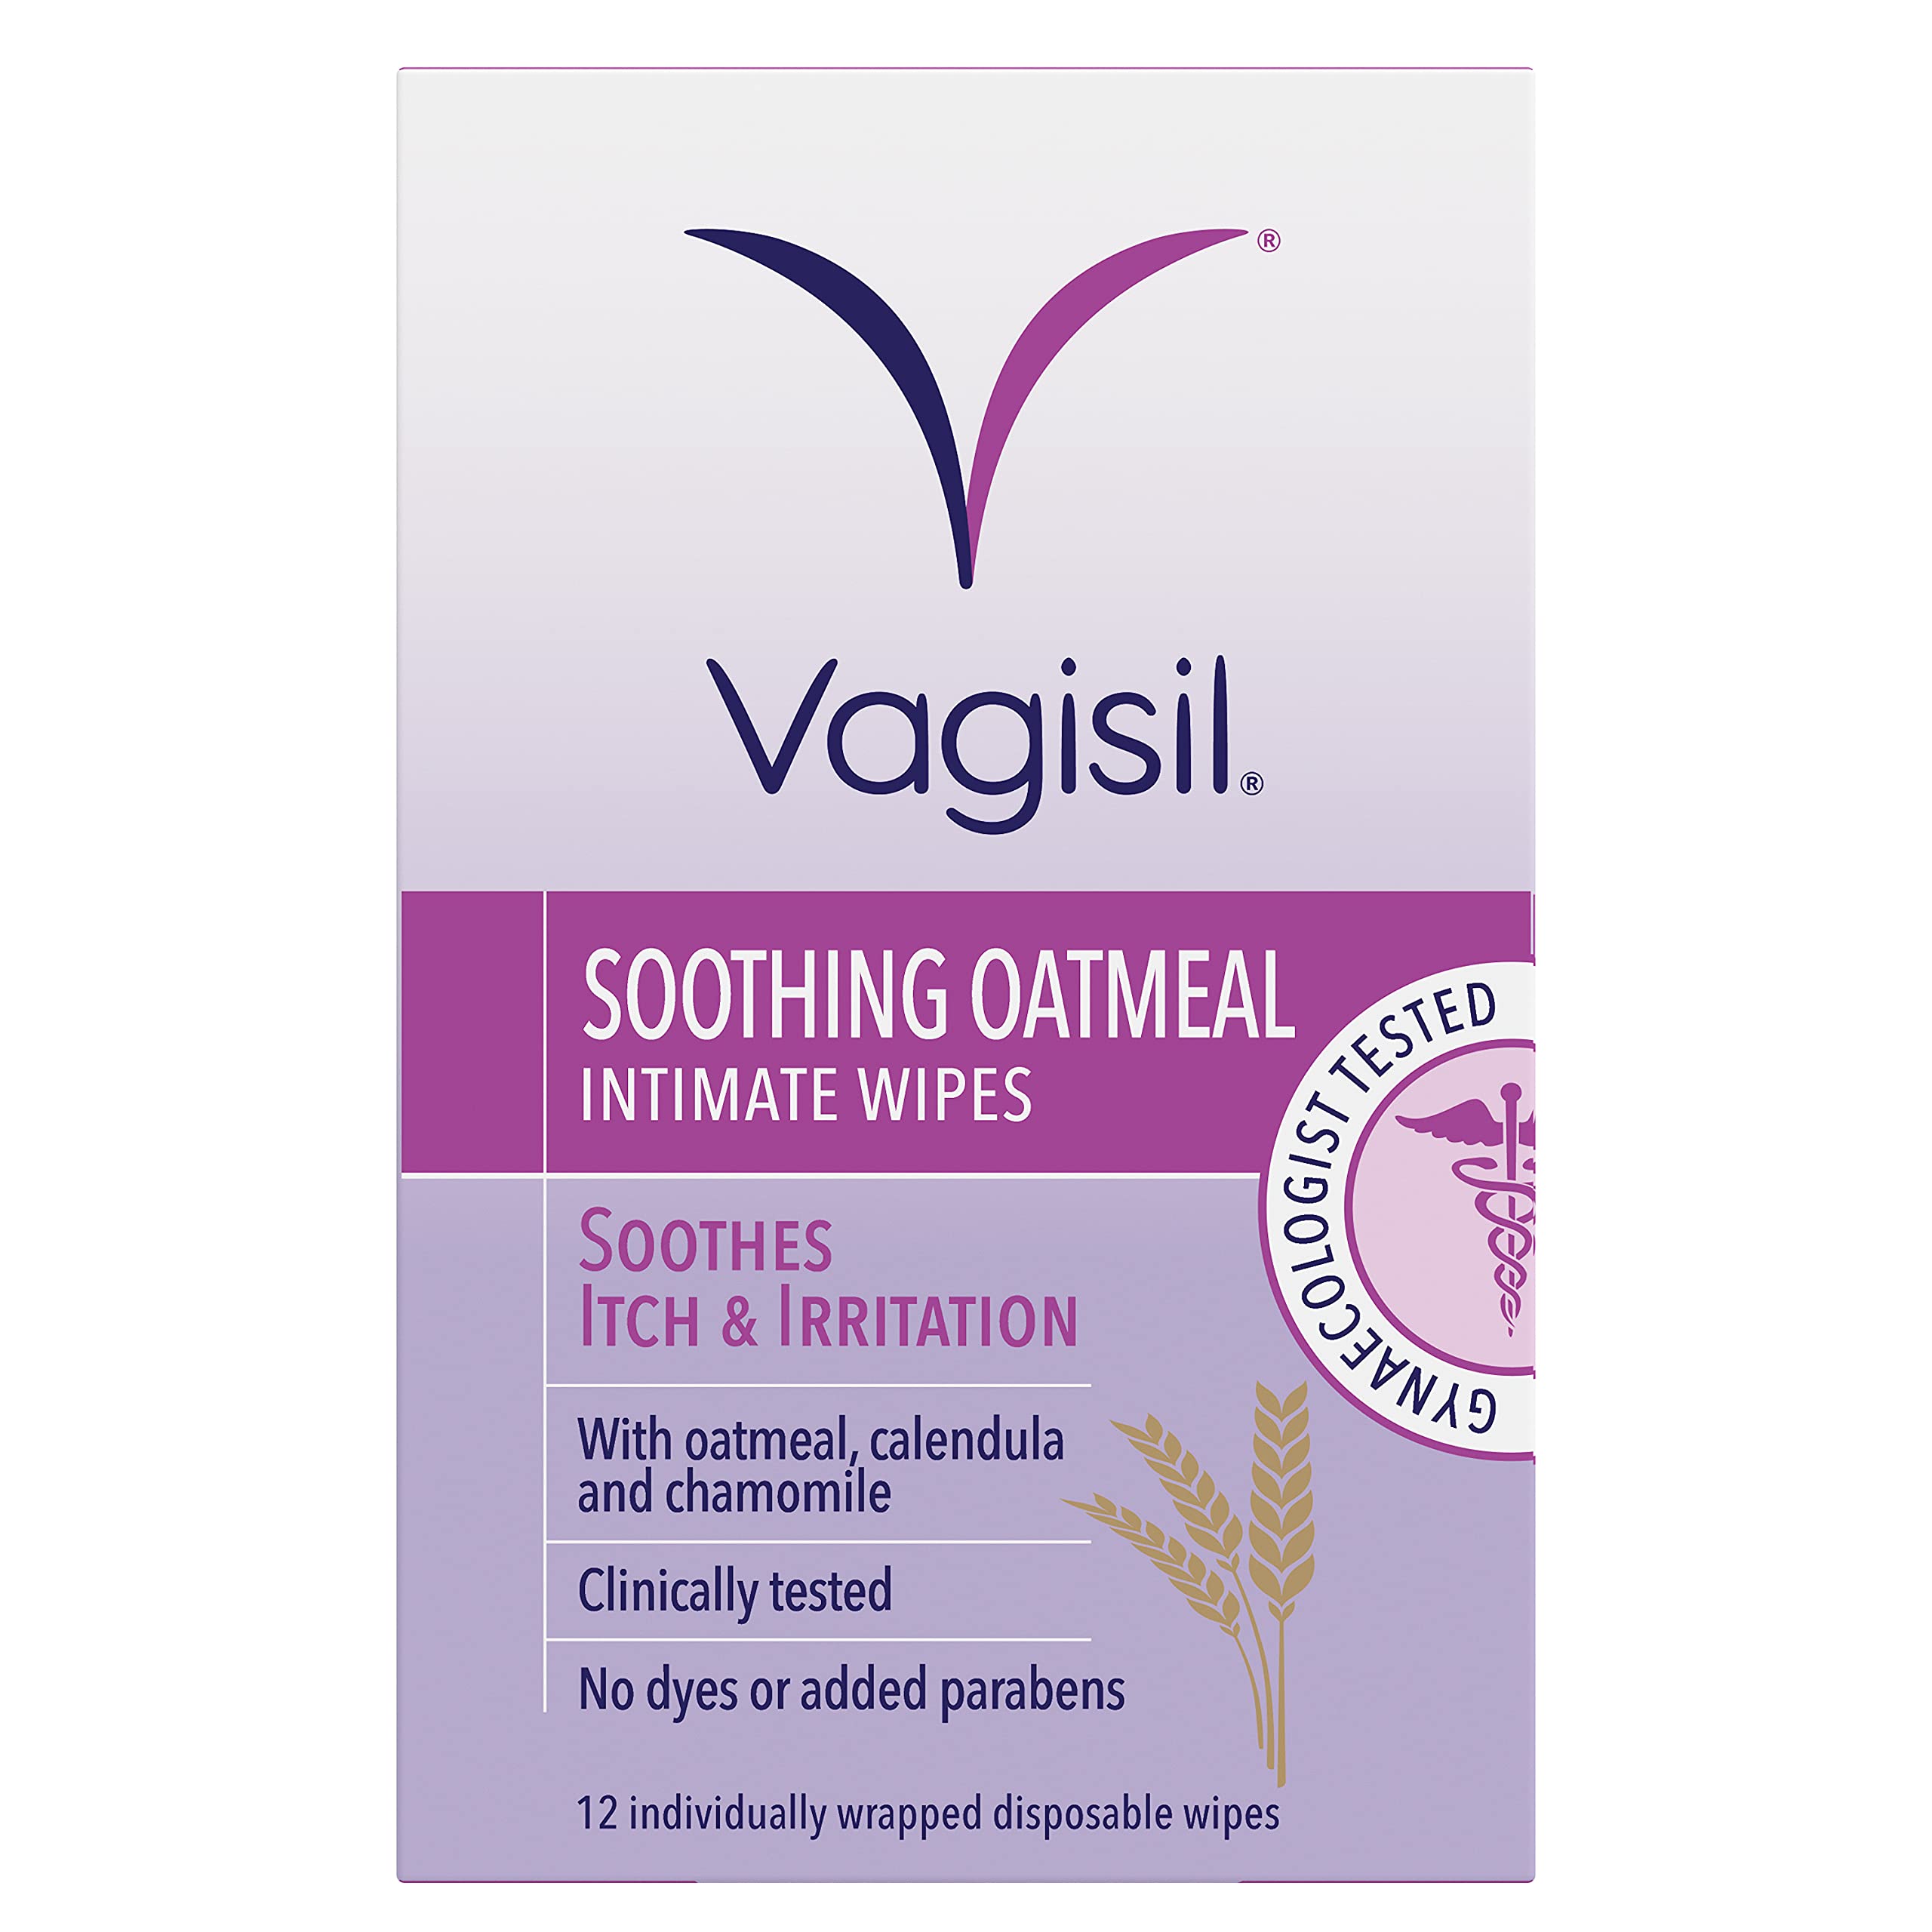 VAGISIL Soothing Oatmeal Intimate Wipes for Burning & Irritation, 12 Wipes Sachet